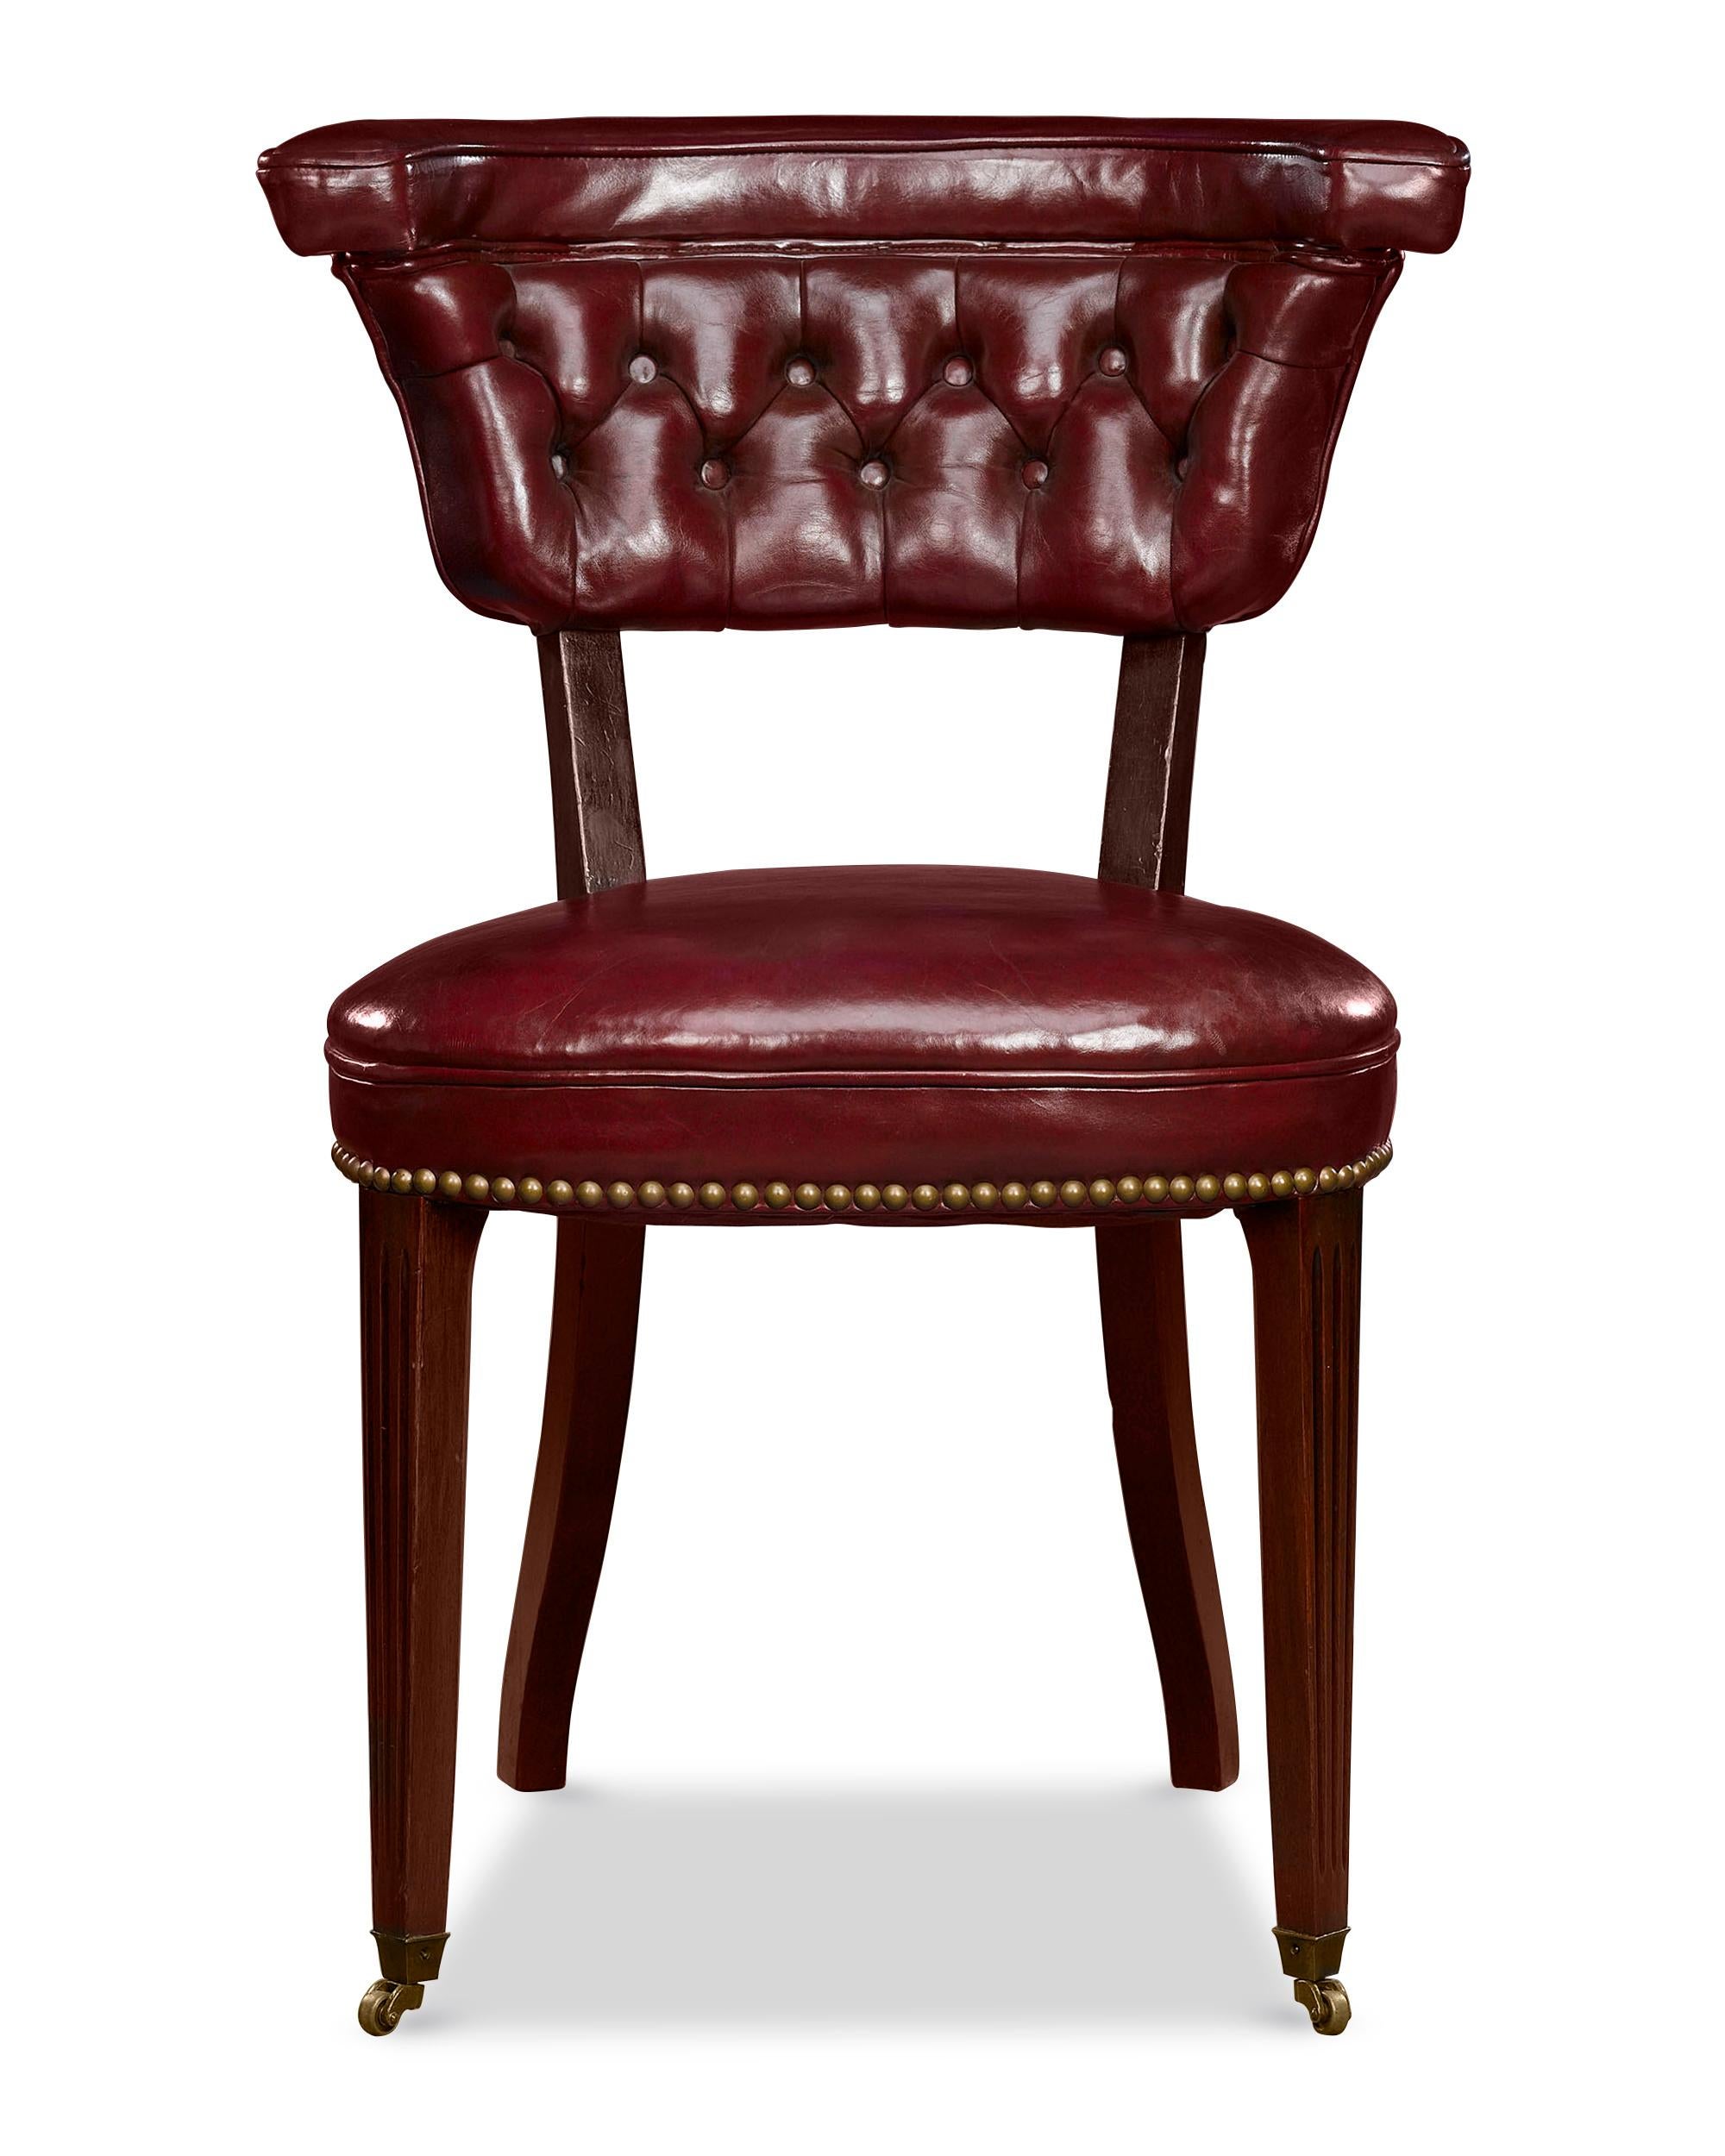 A handsome and rare Georgian-style reading chair, expertly crafted of mahogany. With its high, wide back that slims at the seat, the chair is constructed so that the reader sits in the chair backwards, comfortably resting their arms on the yoke.